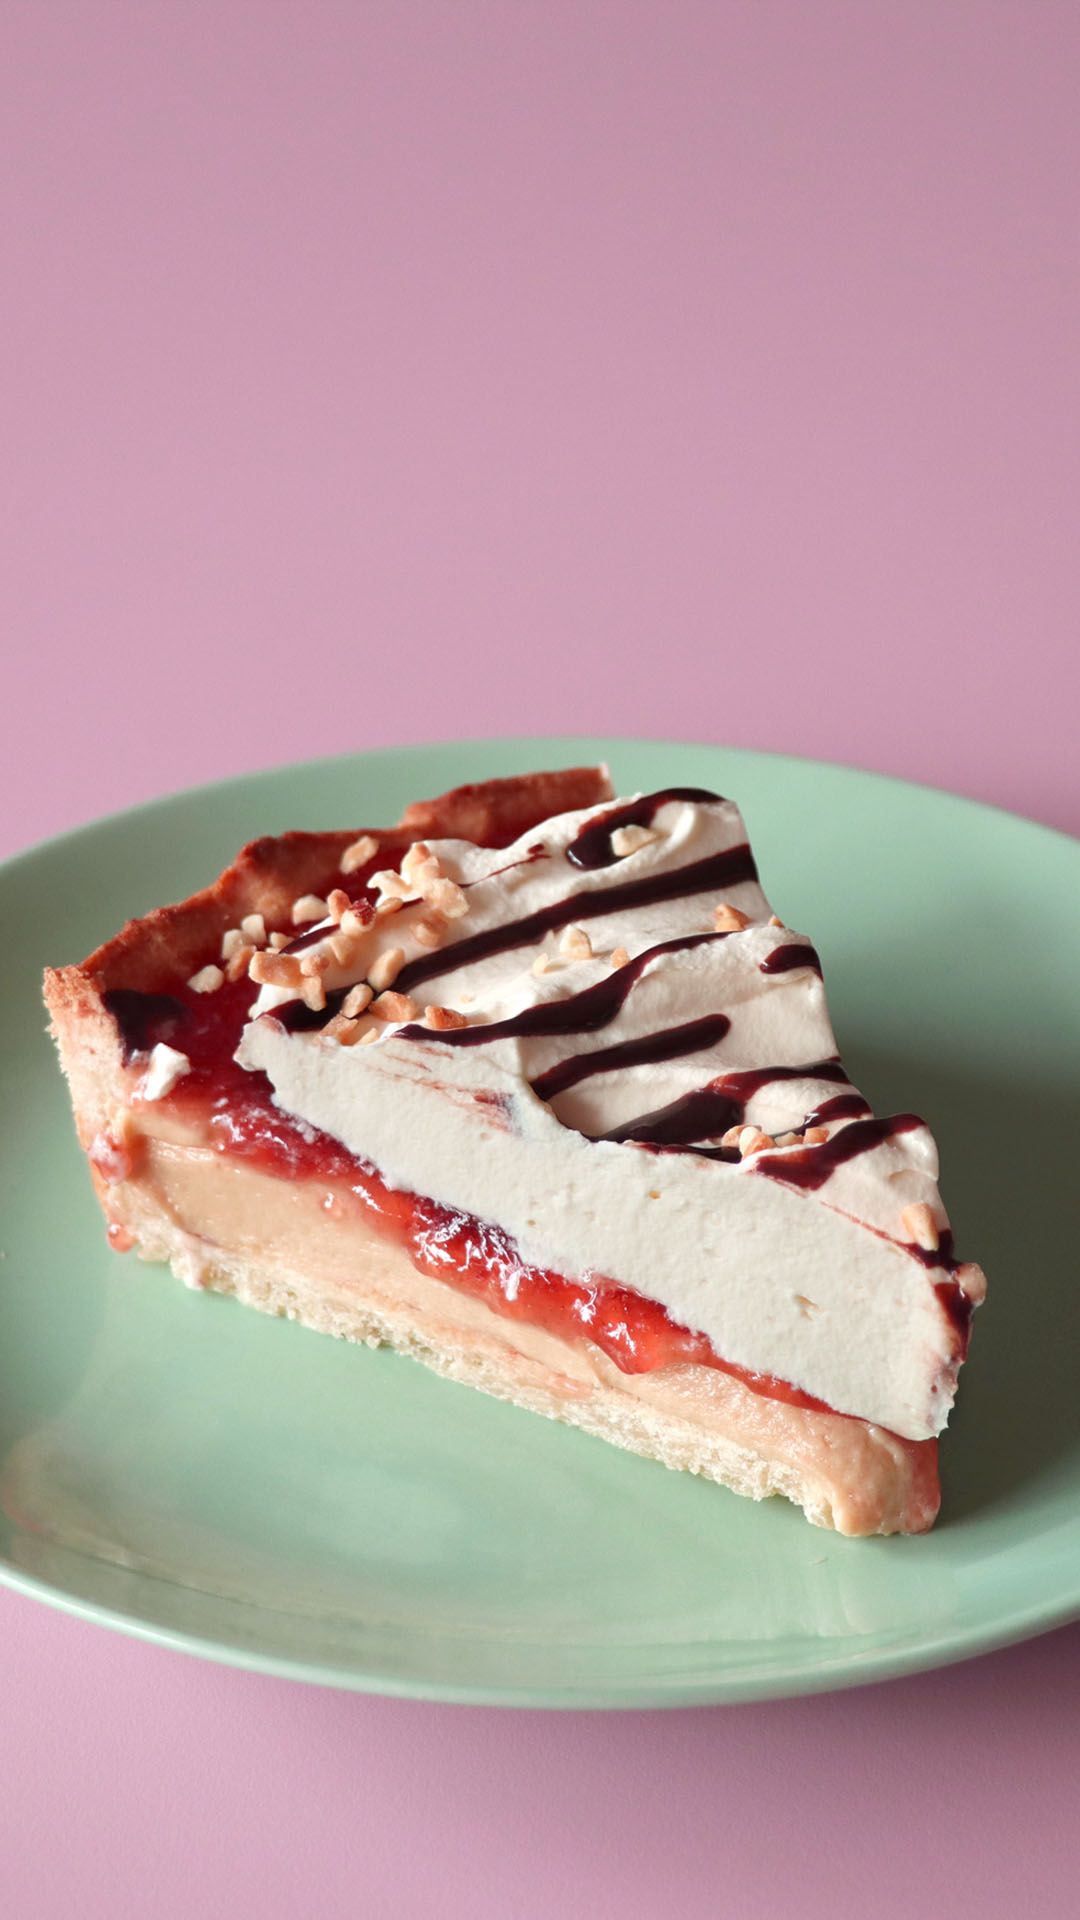 Peanut Butter And Jelly Pie